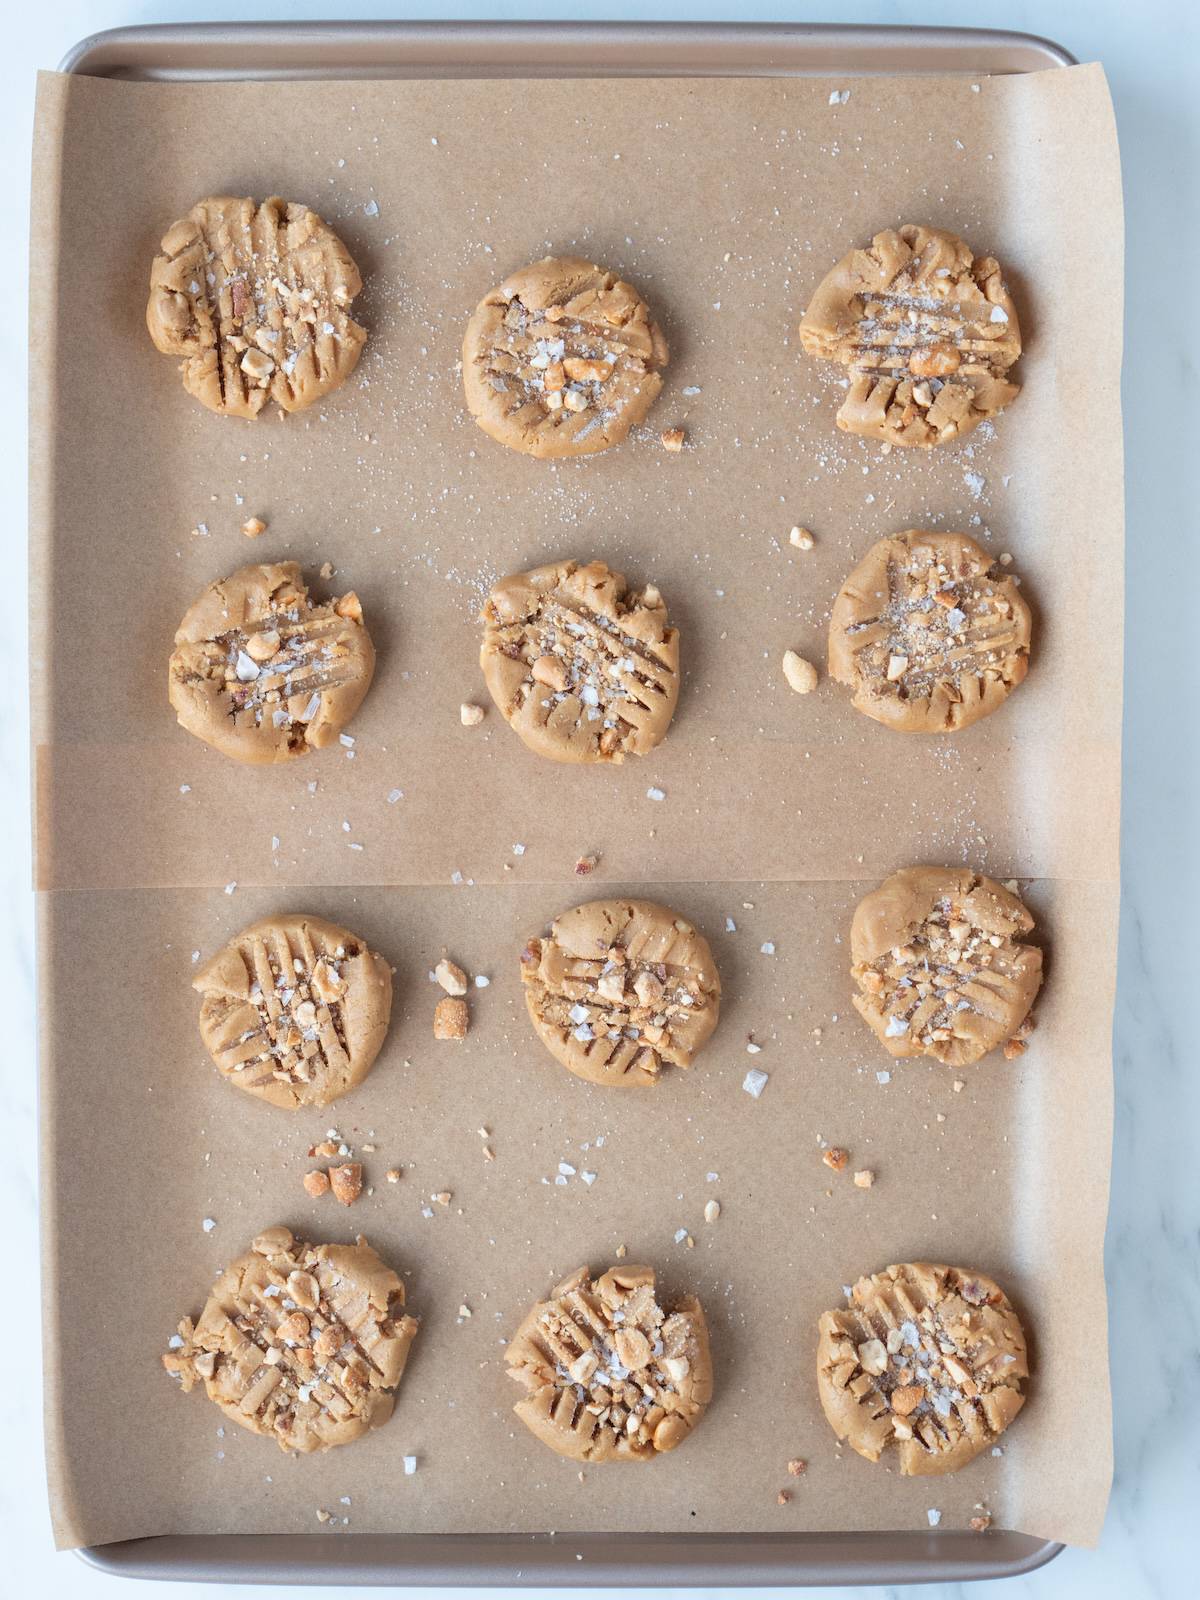 A parchment-lined baking sheet with scoops of peanut butter cookie dough flattened with a fork leaving a crisscross pattern on them, topped with Maldon salt and ready to be baked.